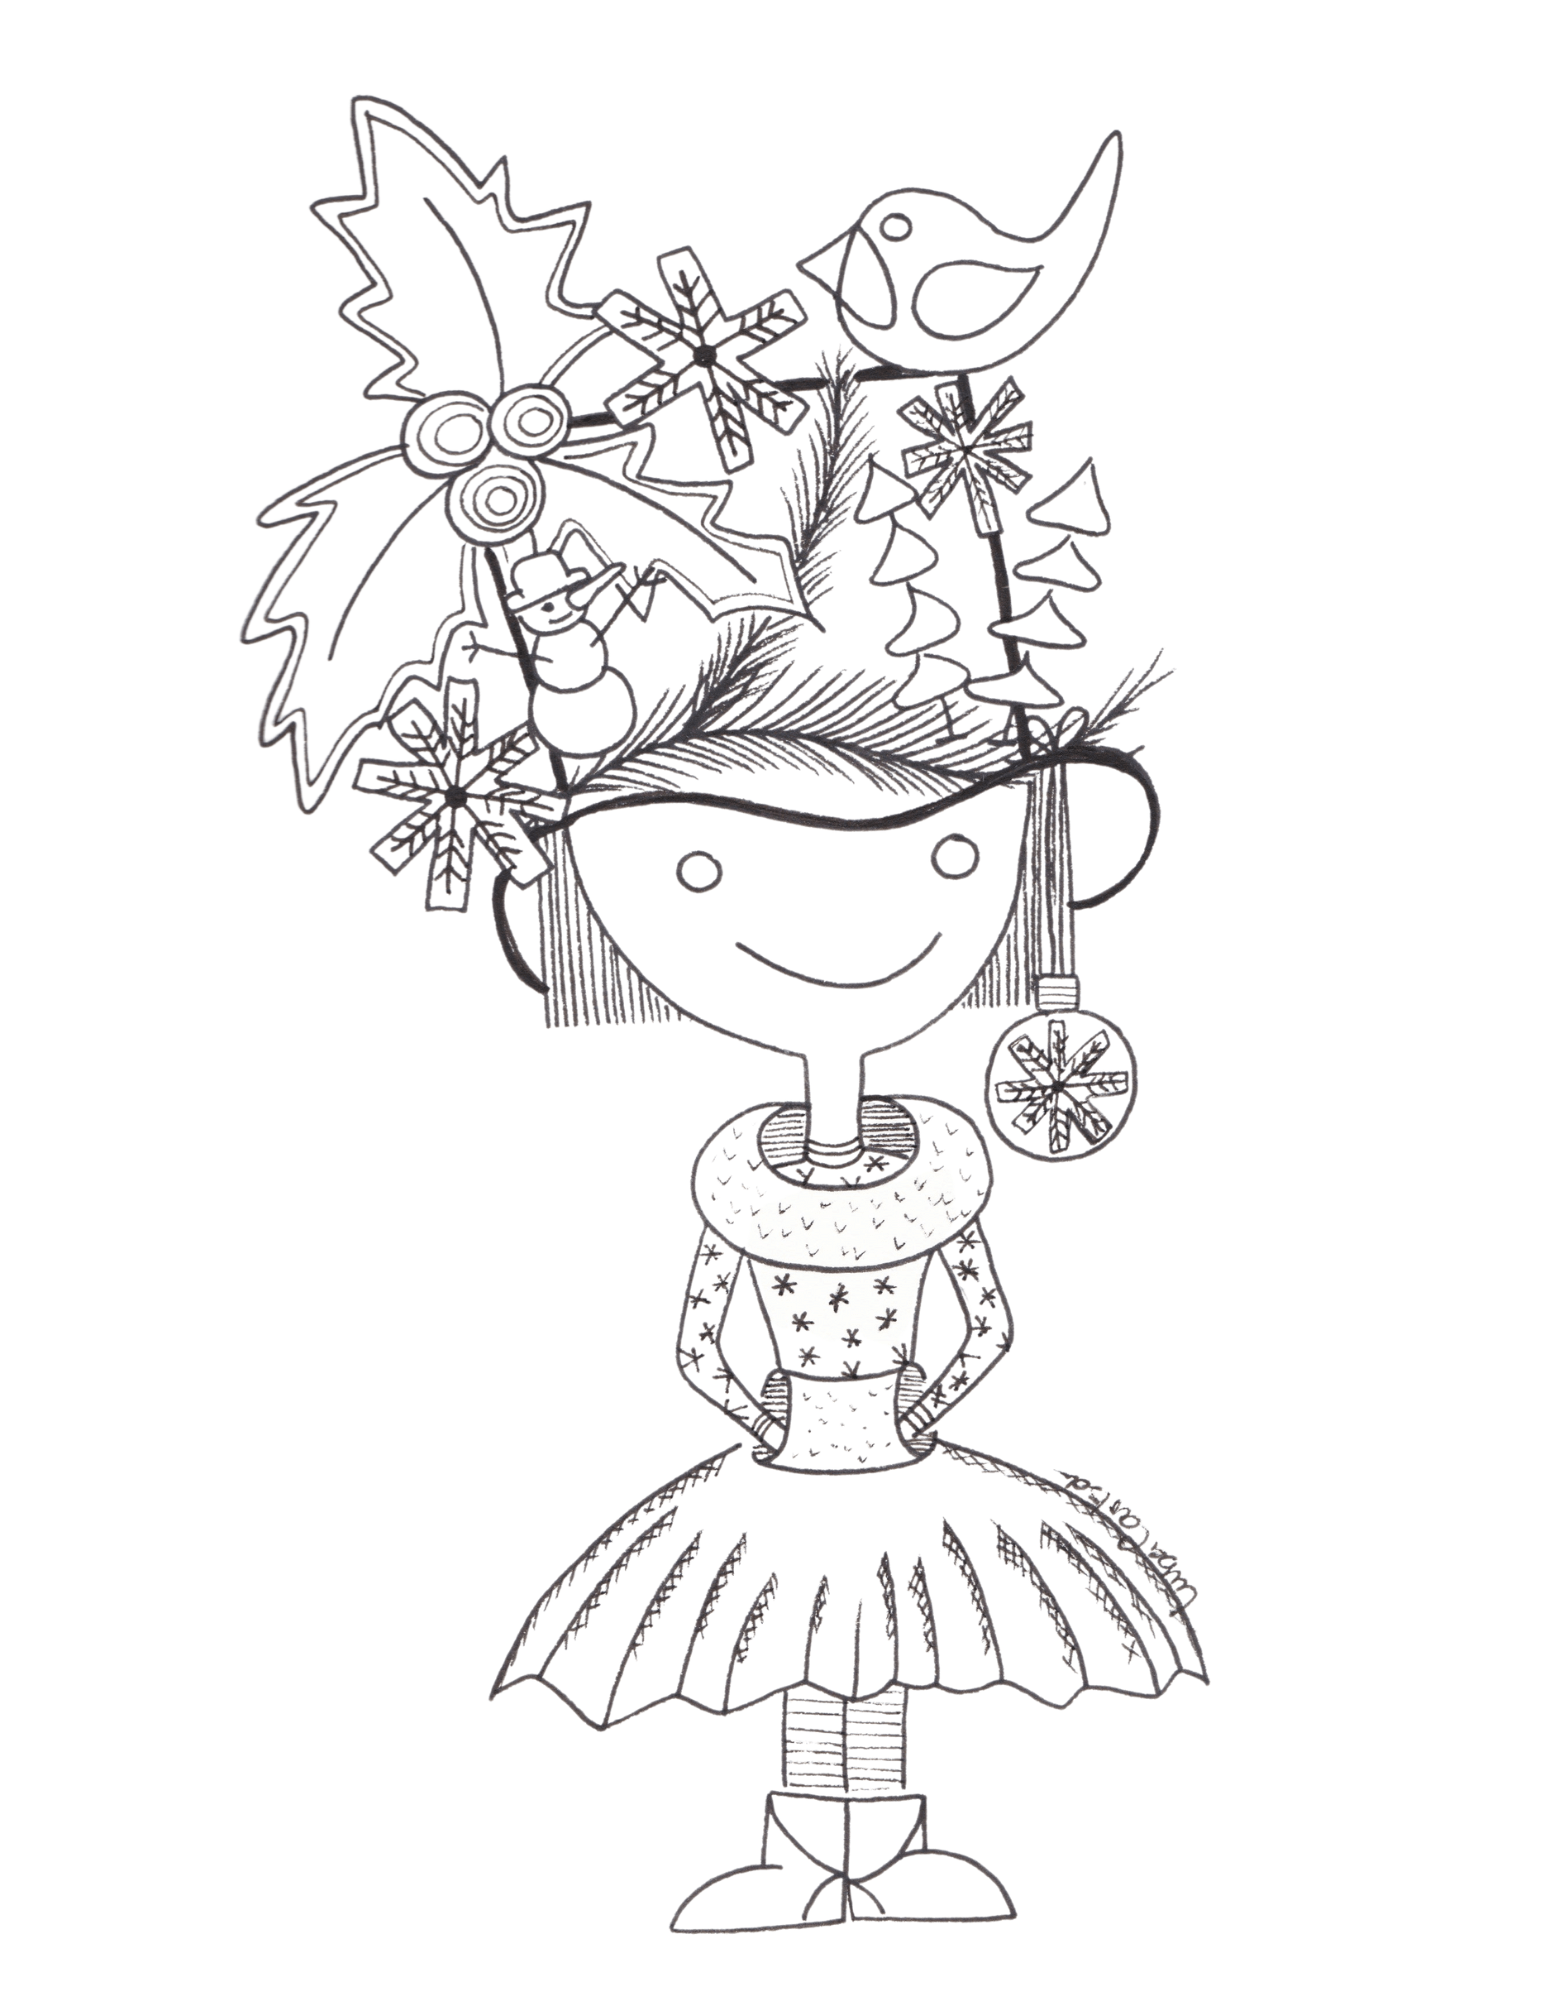 Steam Punk Christmas Girl Coloring Page ...